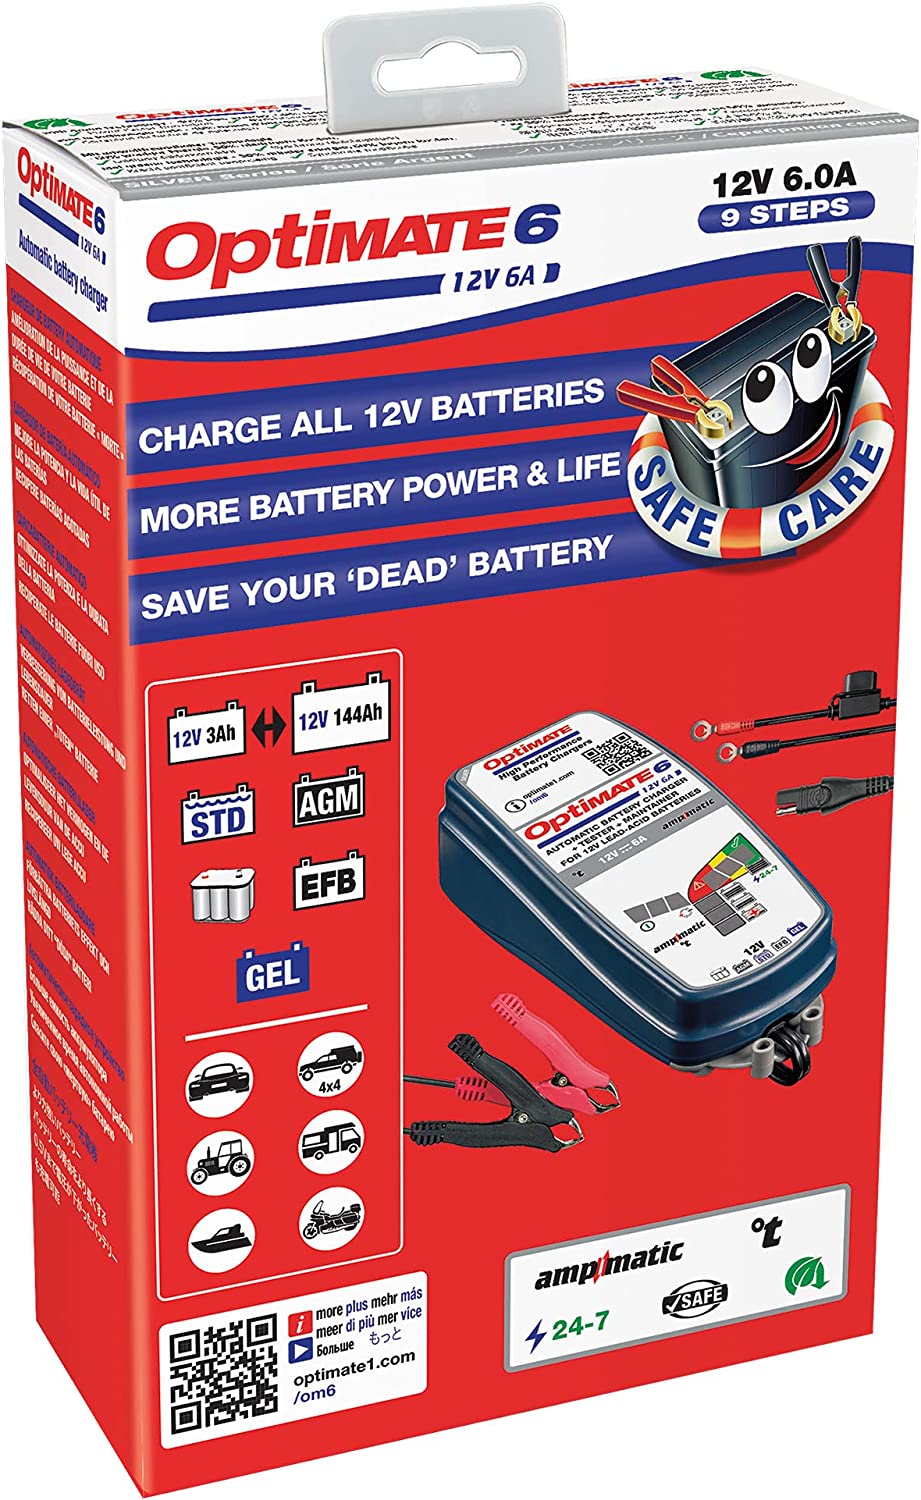 tecMATE OptiMATE 4 Dual Program 9 Step 12 Volt Battery  Charger/Tester/Maintainer - TM-341